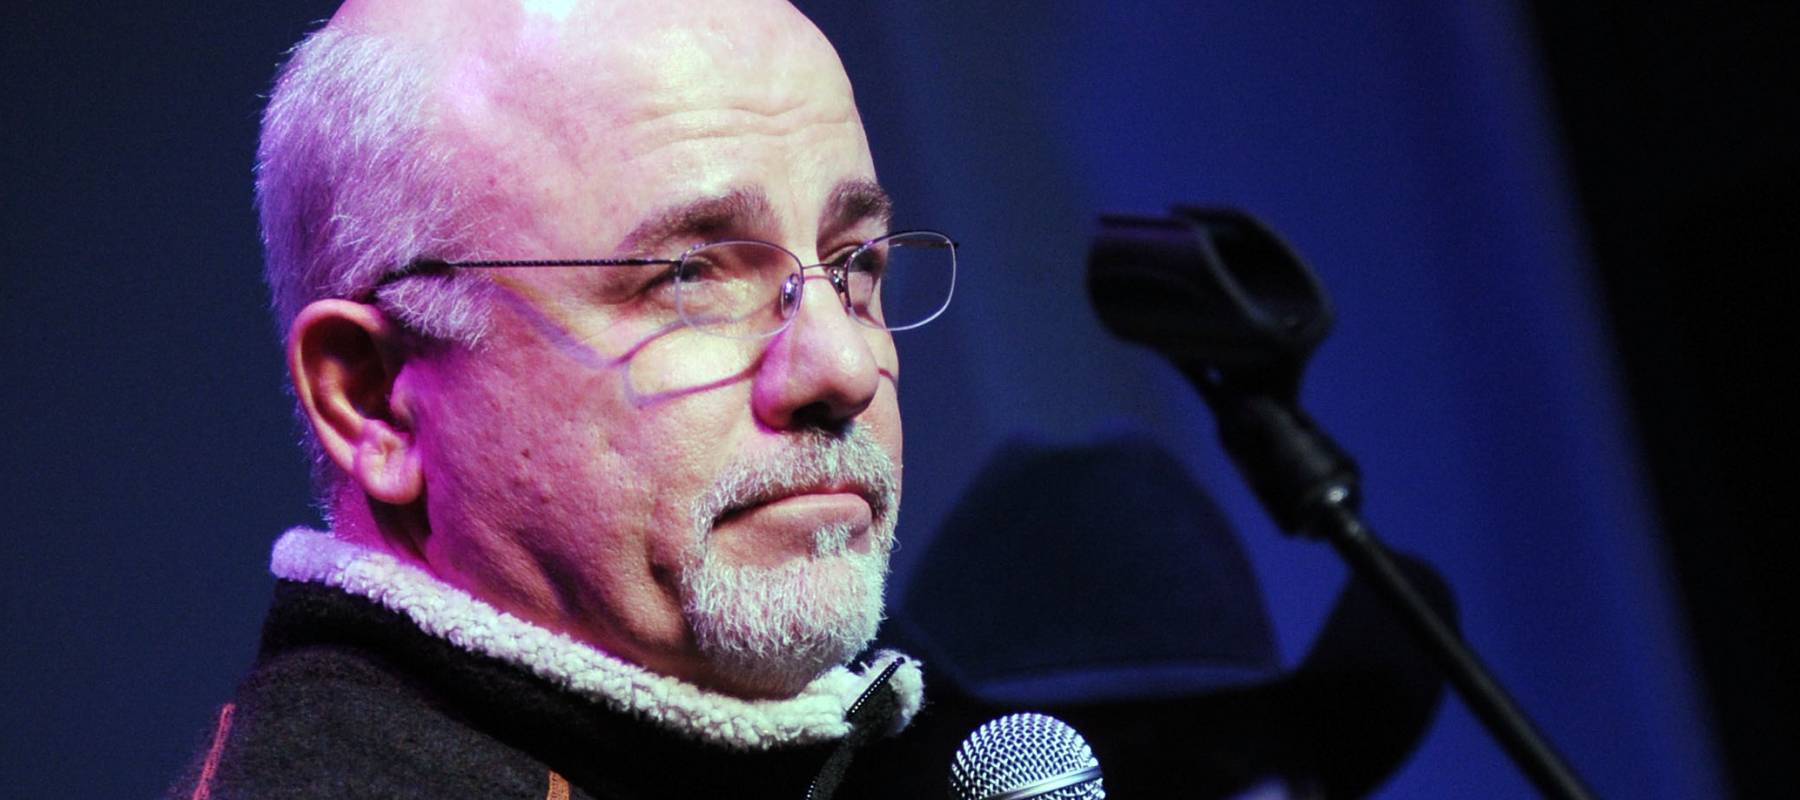 Dave Ramsey attends an event at Mount Richmore in Nashville, Tennessee, March 6, 2011.